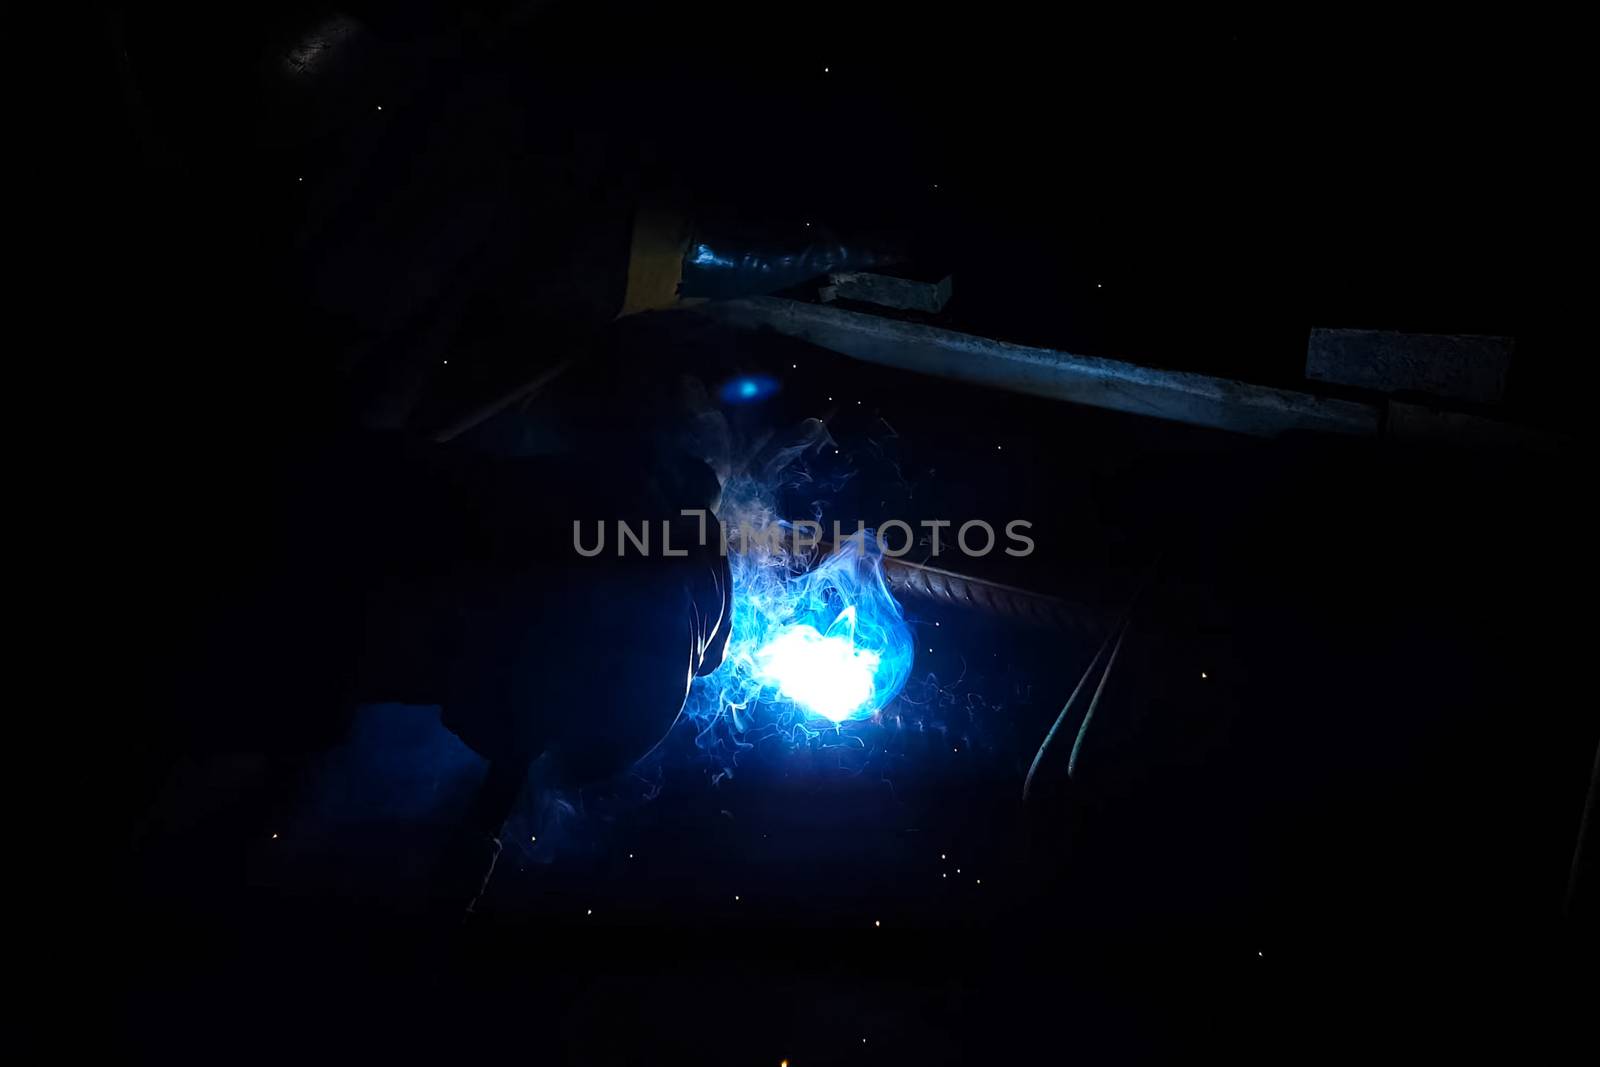 Welding of steel reinforcement. Sparks and light from welding. Electric welding.